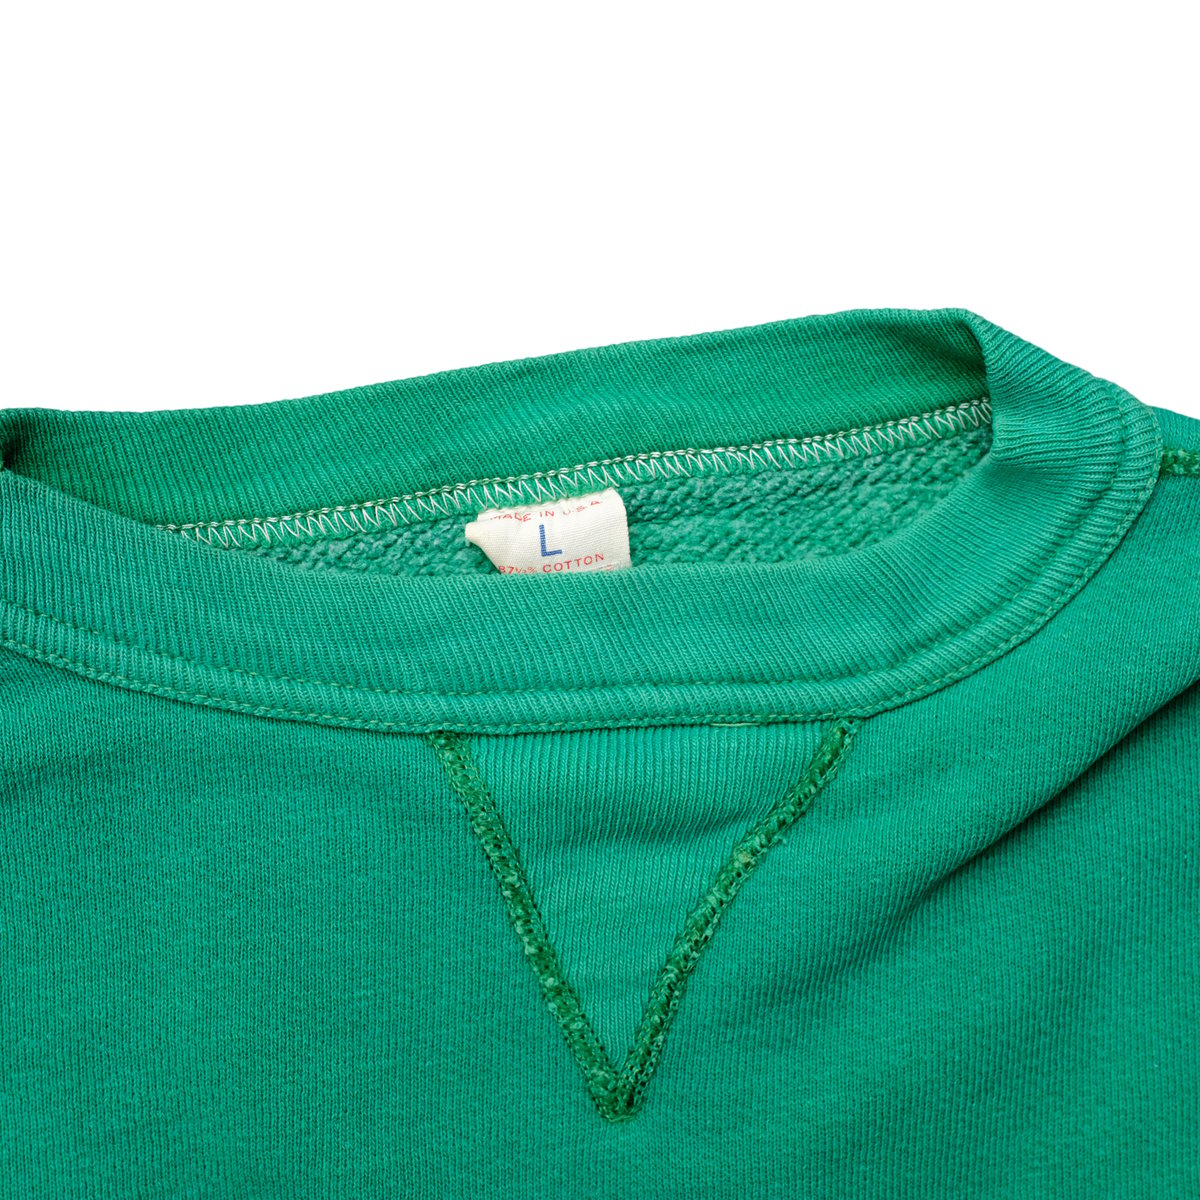 Image of Vintage 1960's Green Russell Southern Sweatshirt